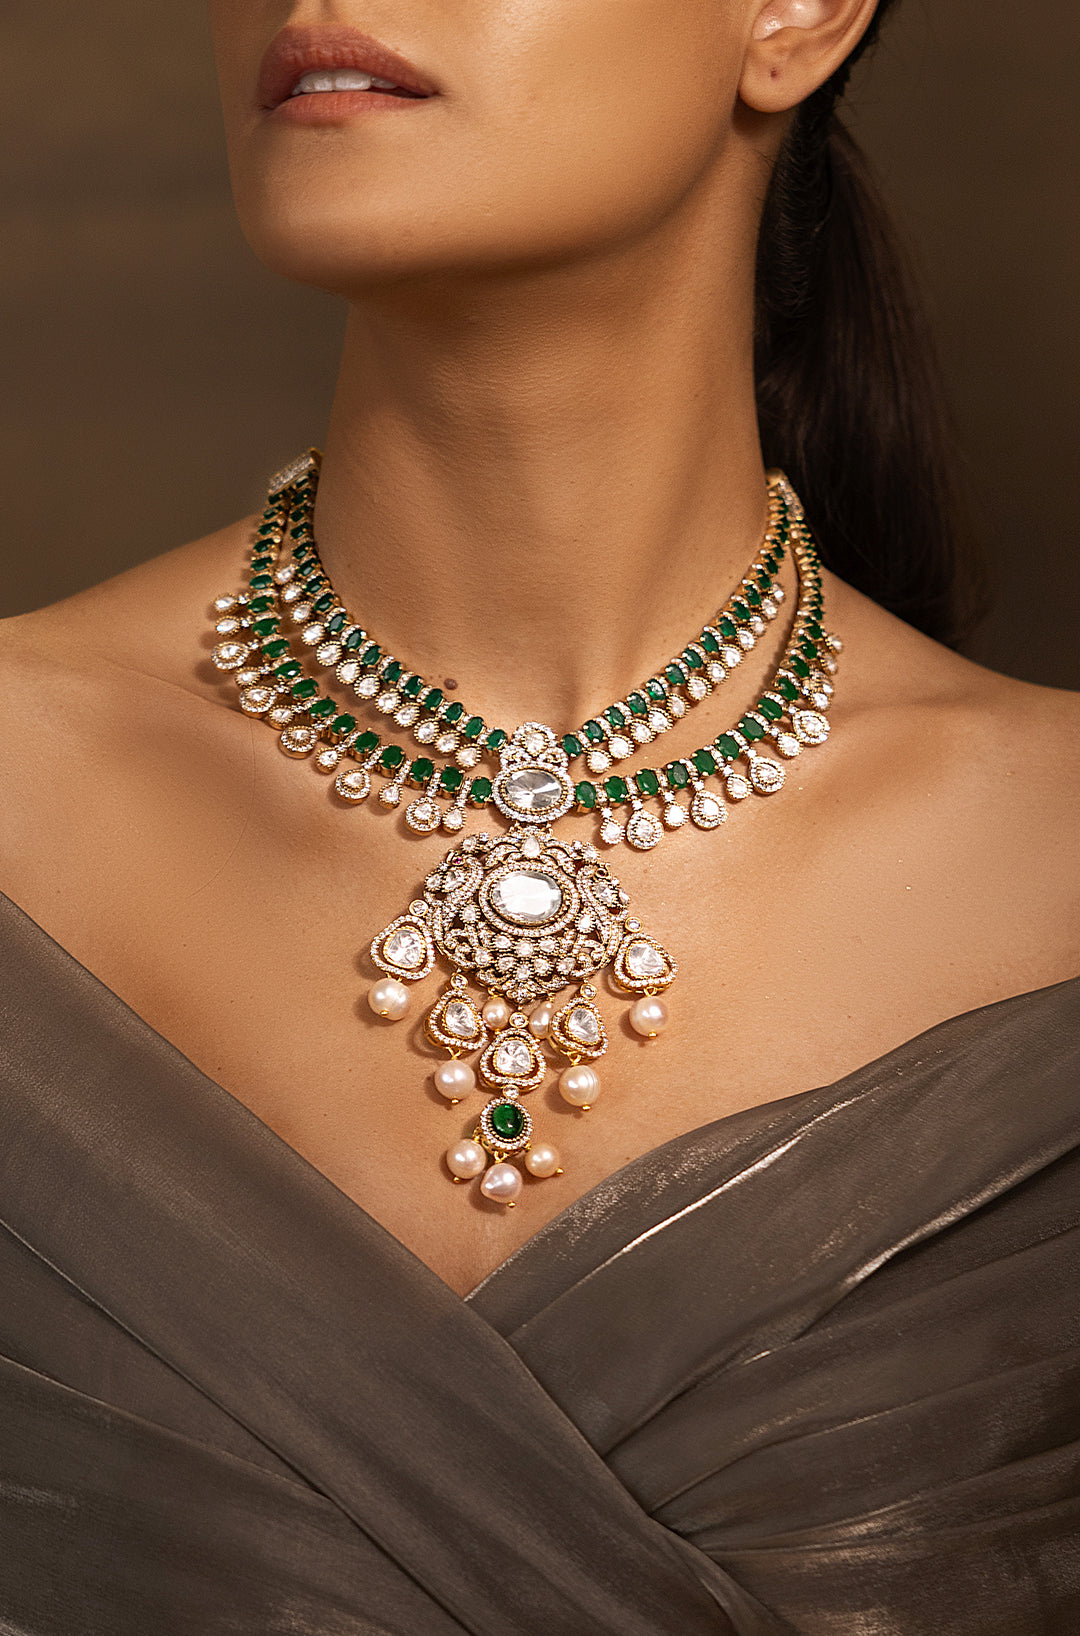 Classic Golden-Green Necklace